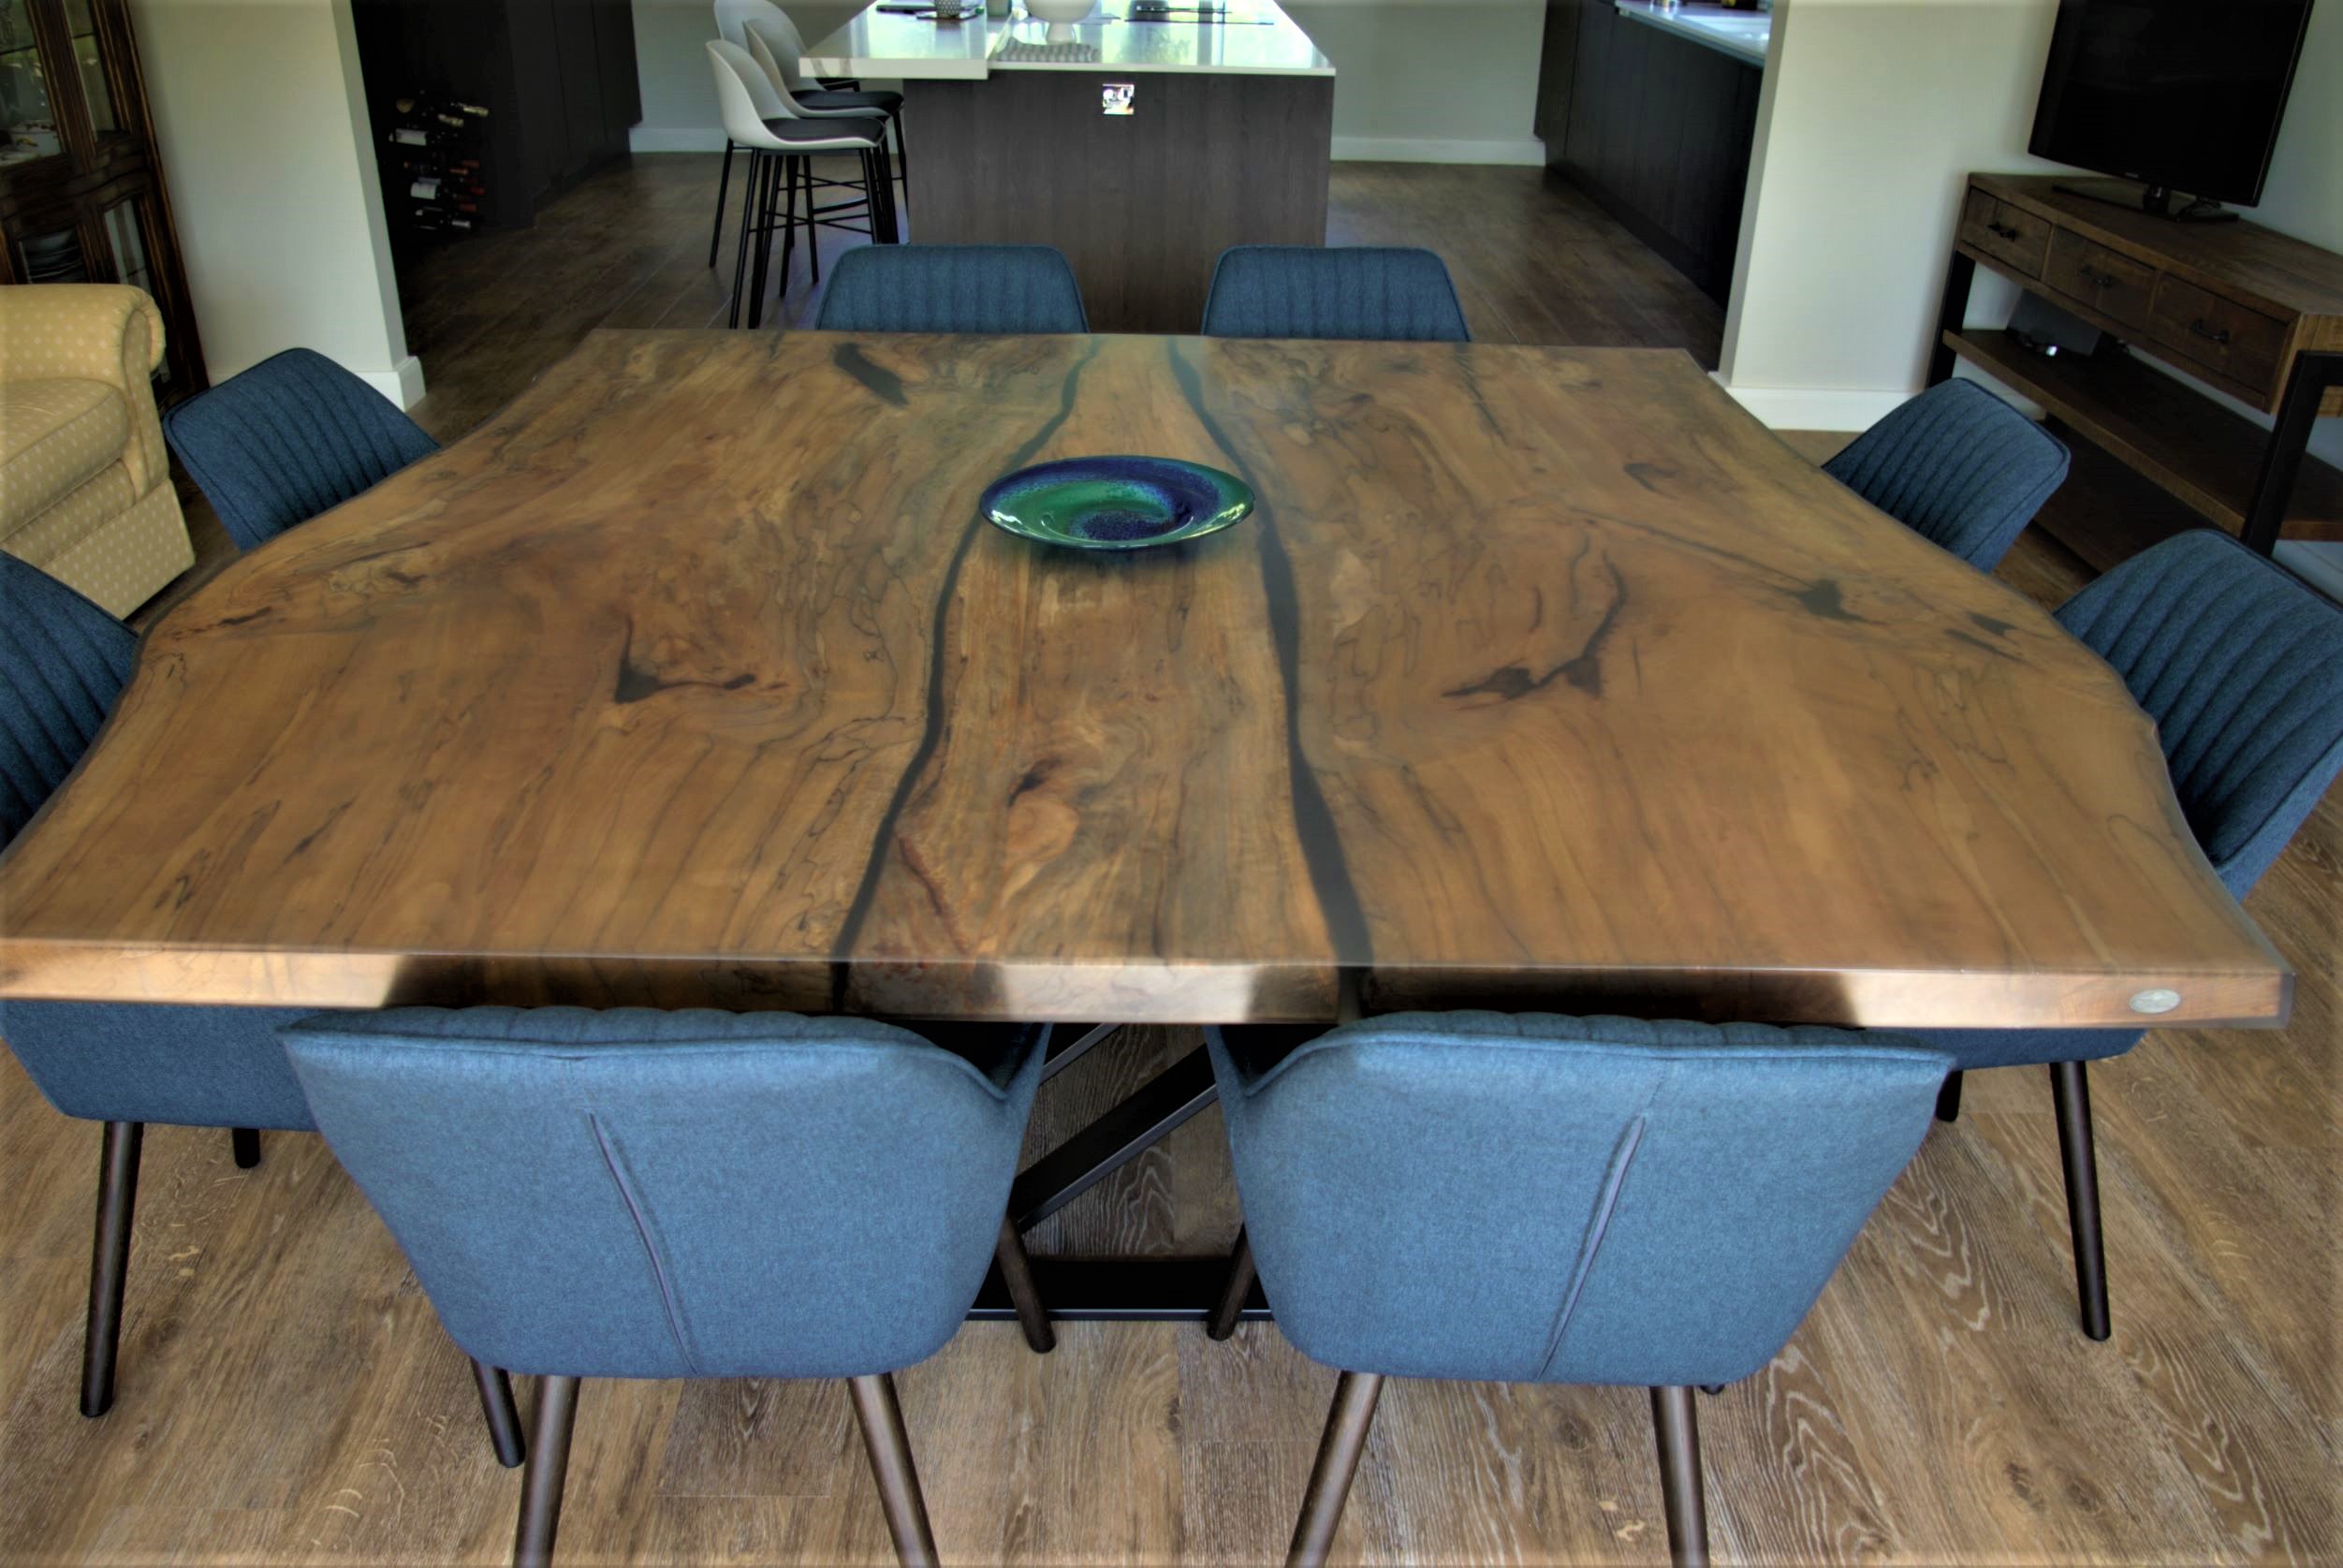 Bespoke Dining Table